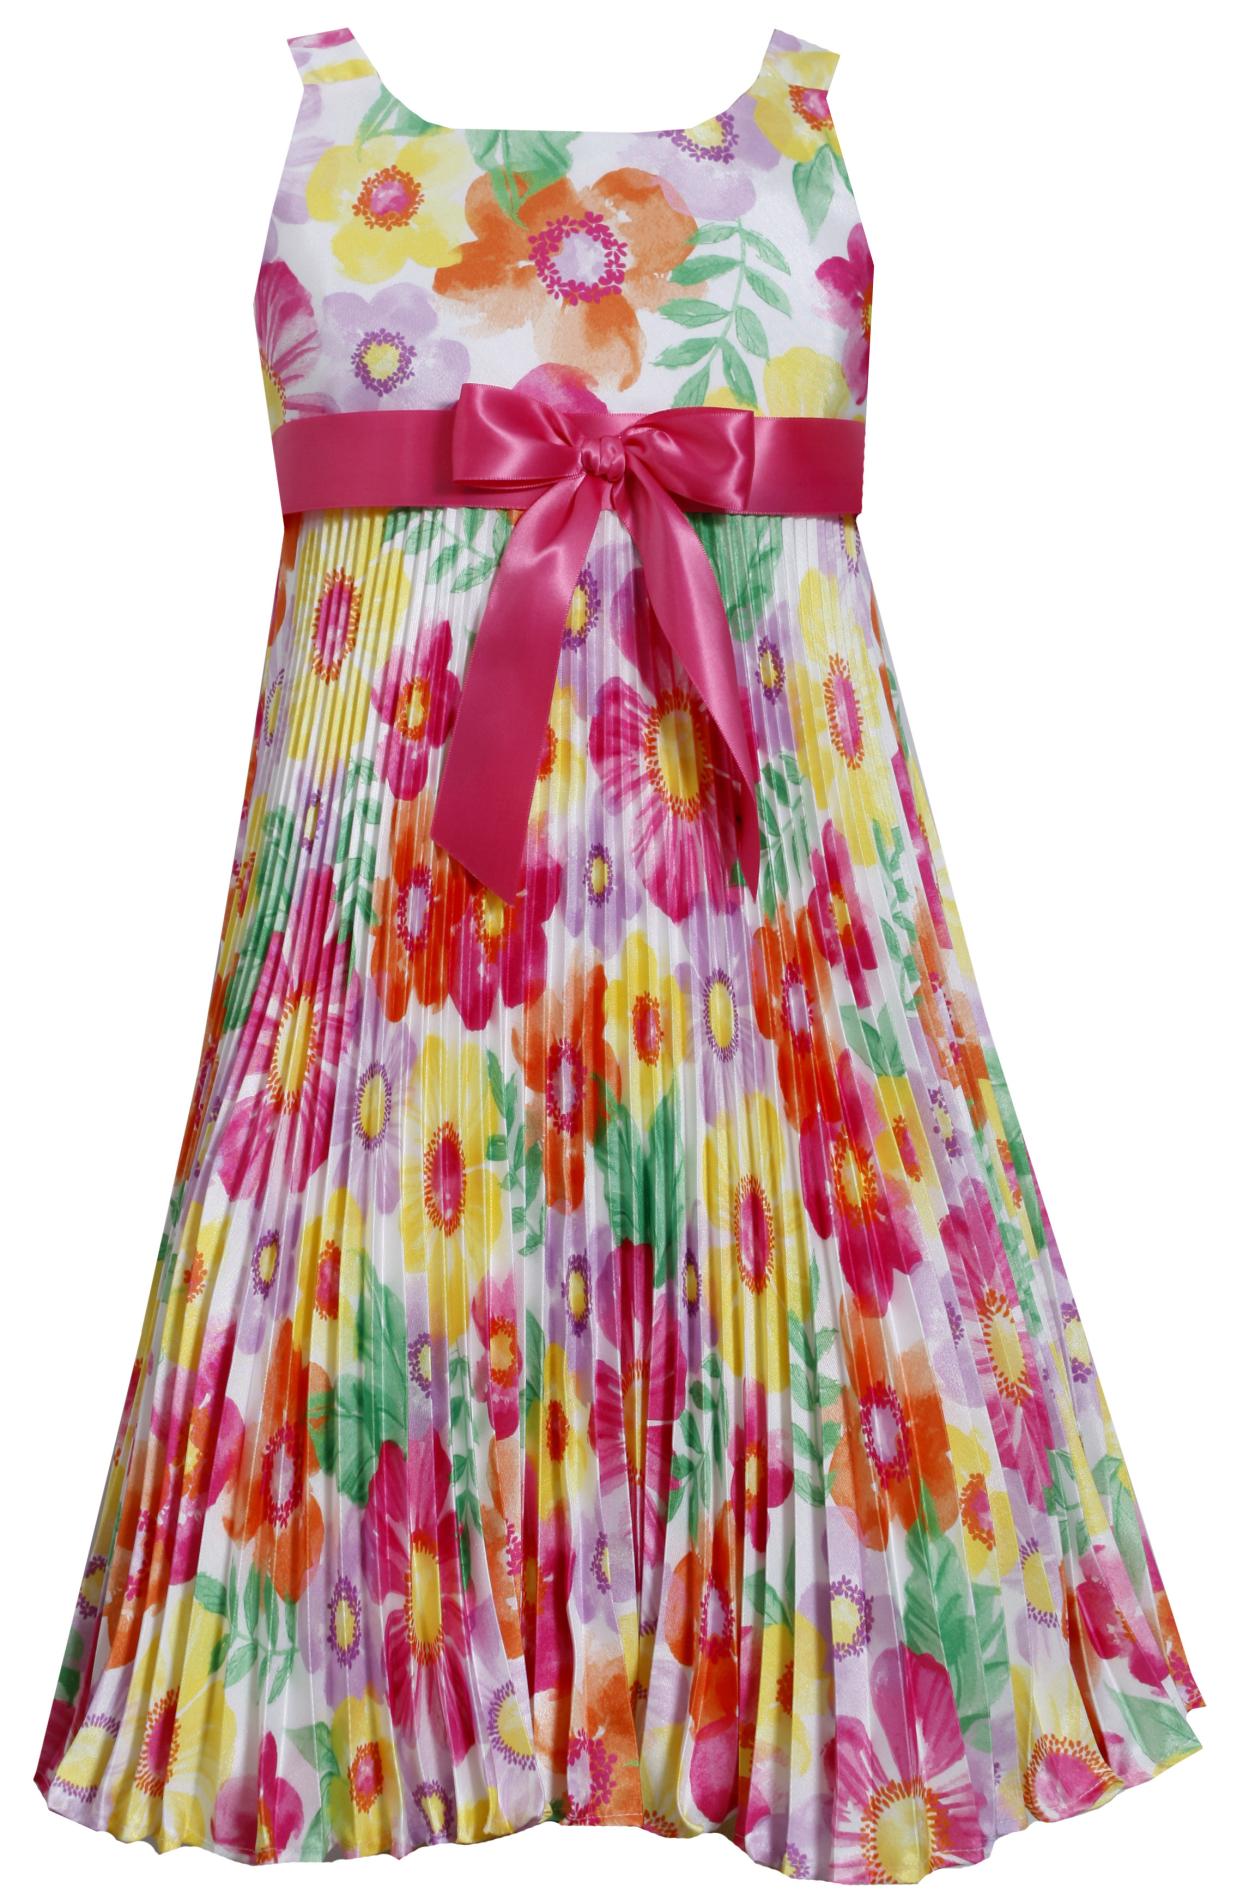 Ashley Ann Girl's Pleated A-Line Party Dress - Floral